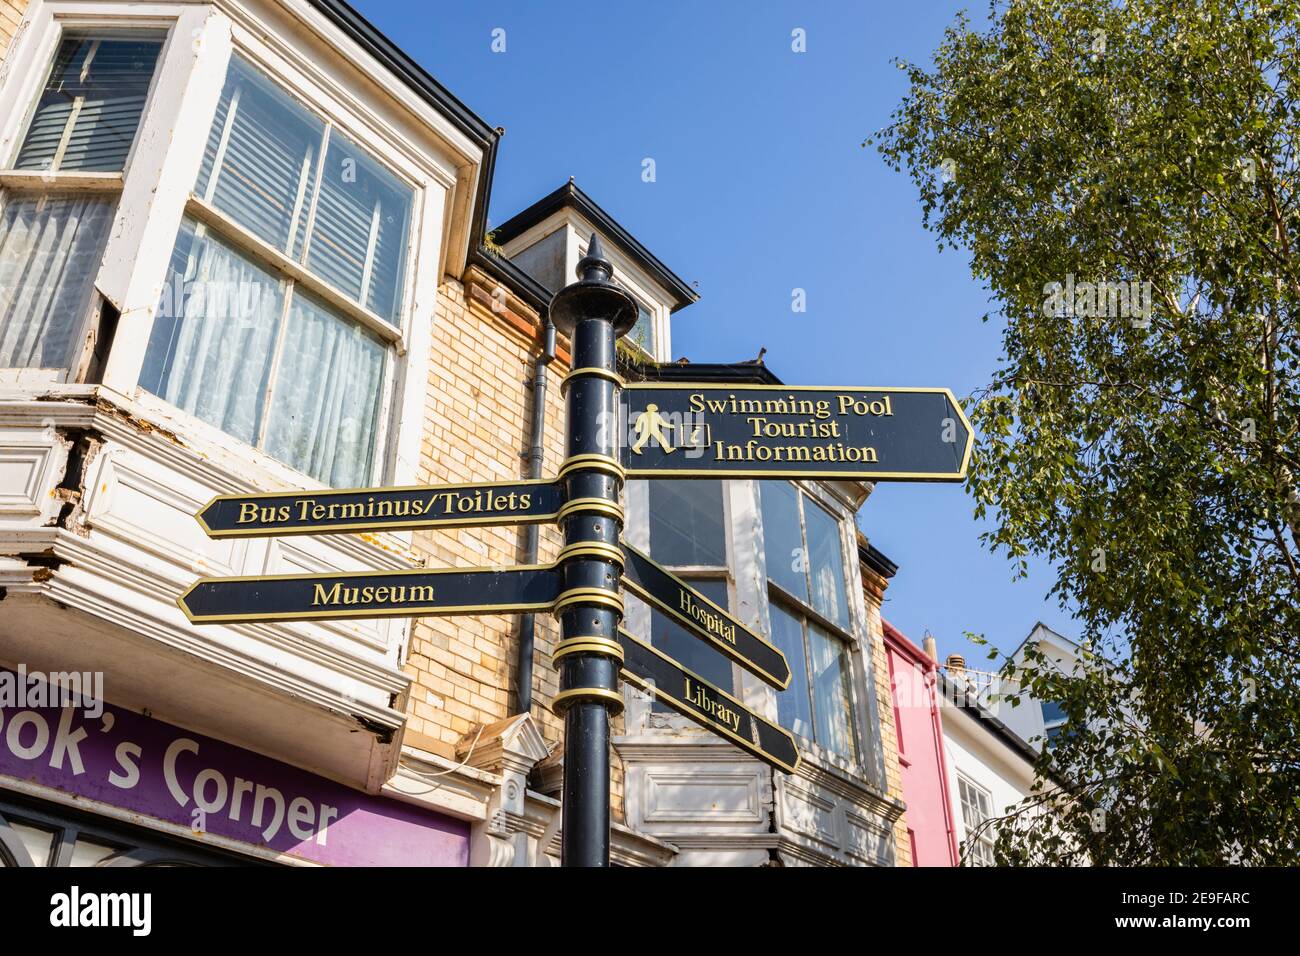 Information signpost pointing to local attractions, amenities and places of interest in Sidmouth, a coastal town in Devon on the Jurassic Coast Stock Photo